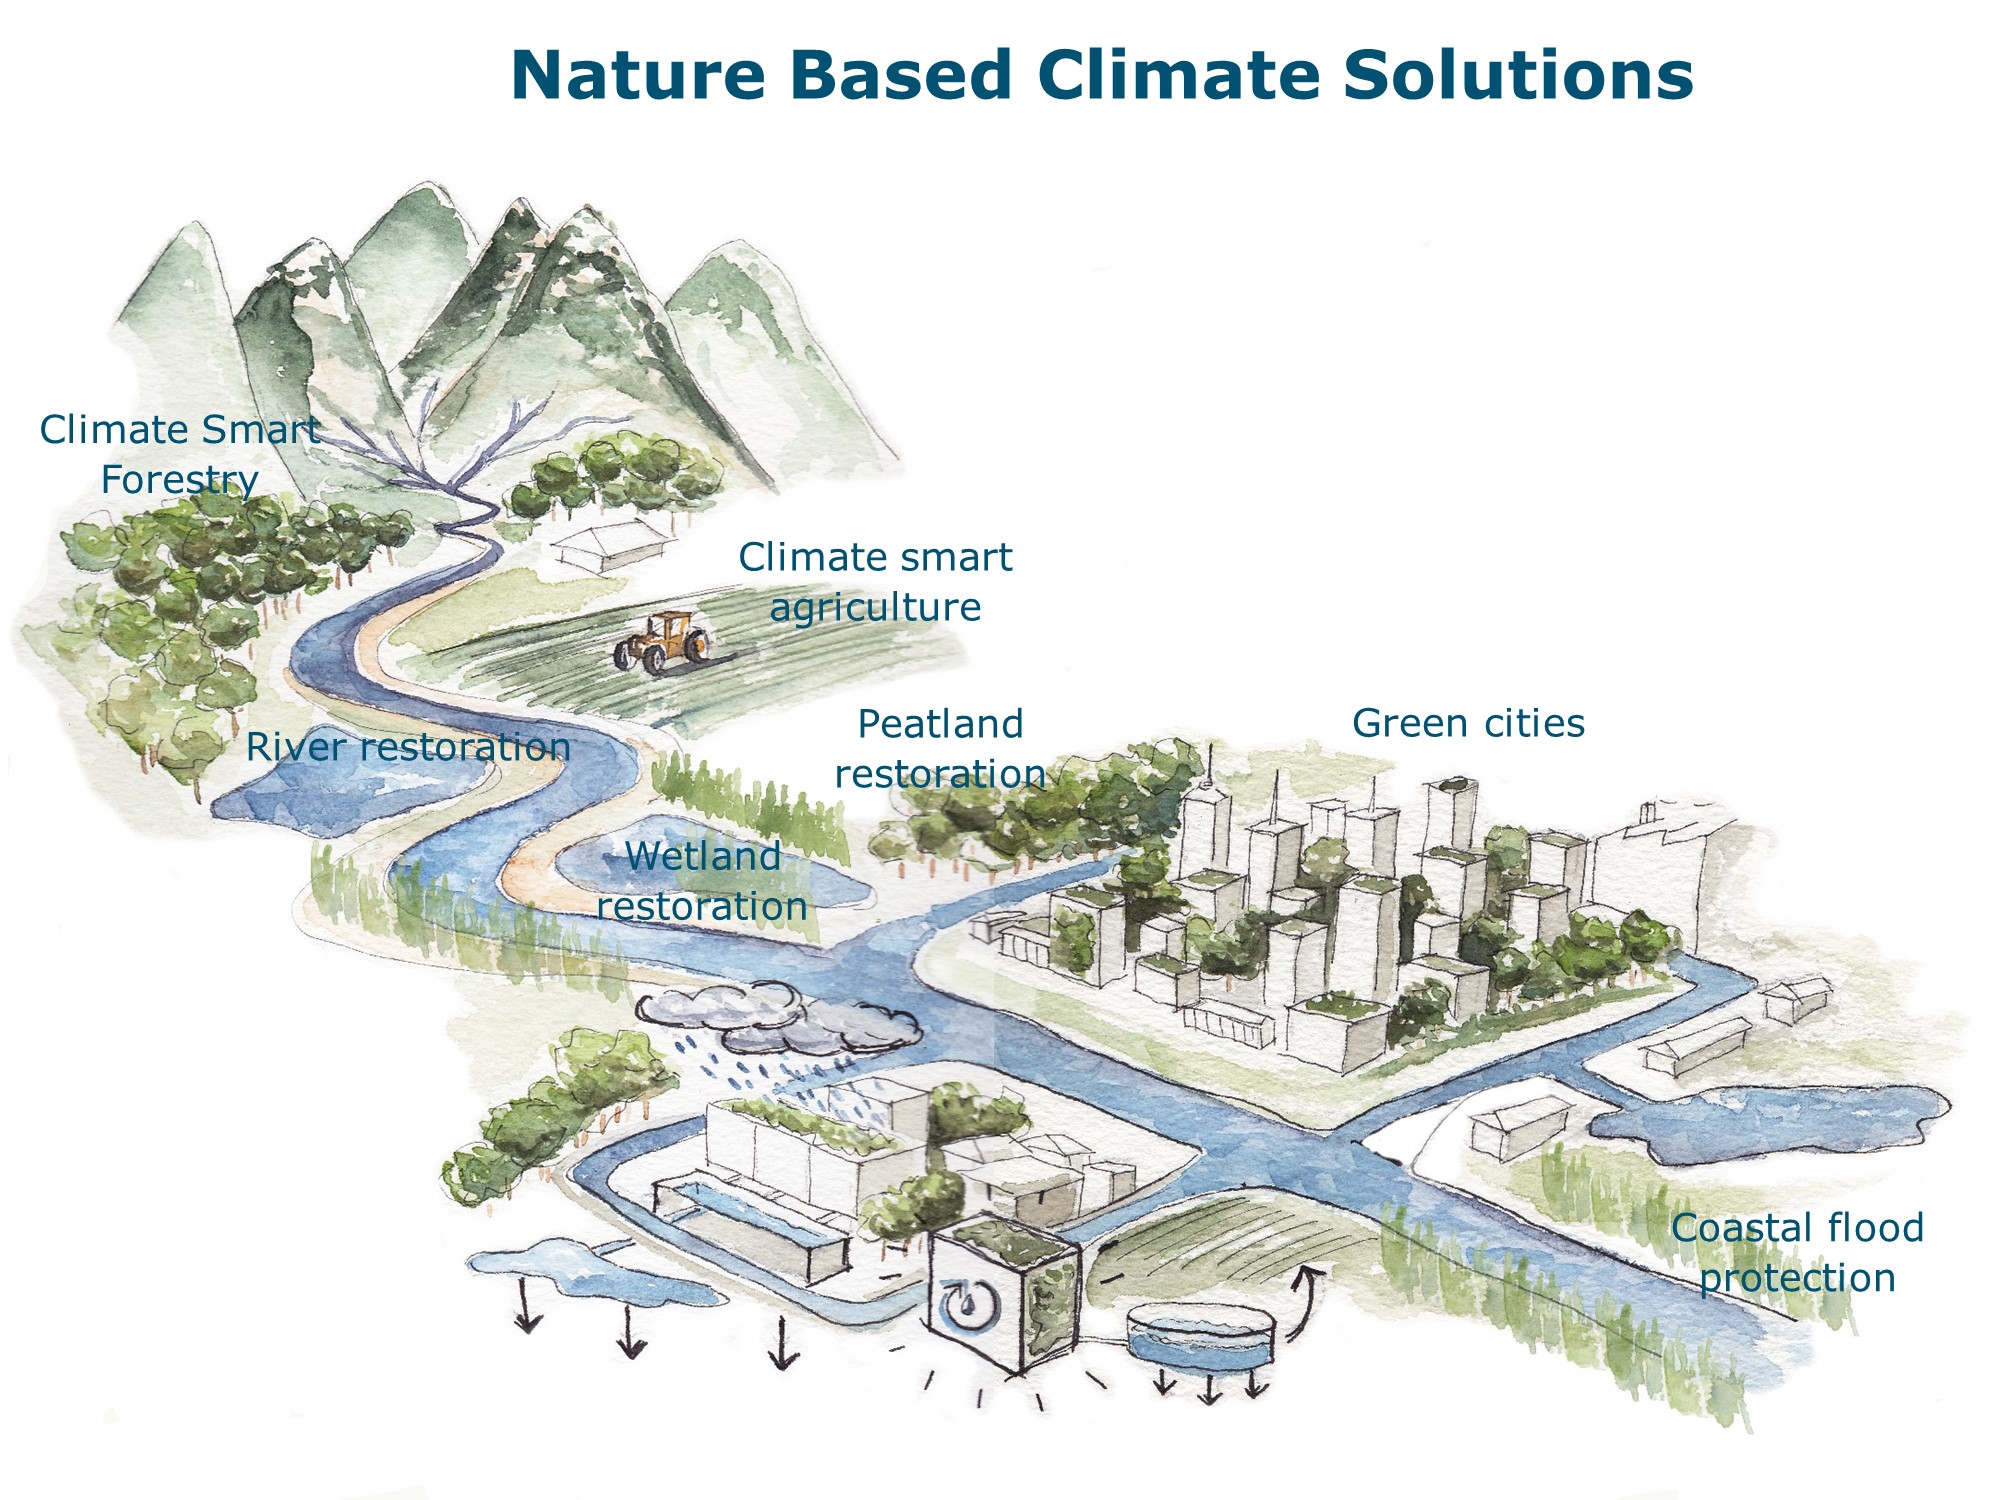 Nature as the for climate solutions -